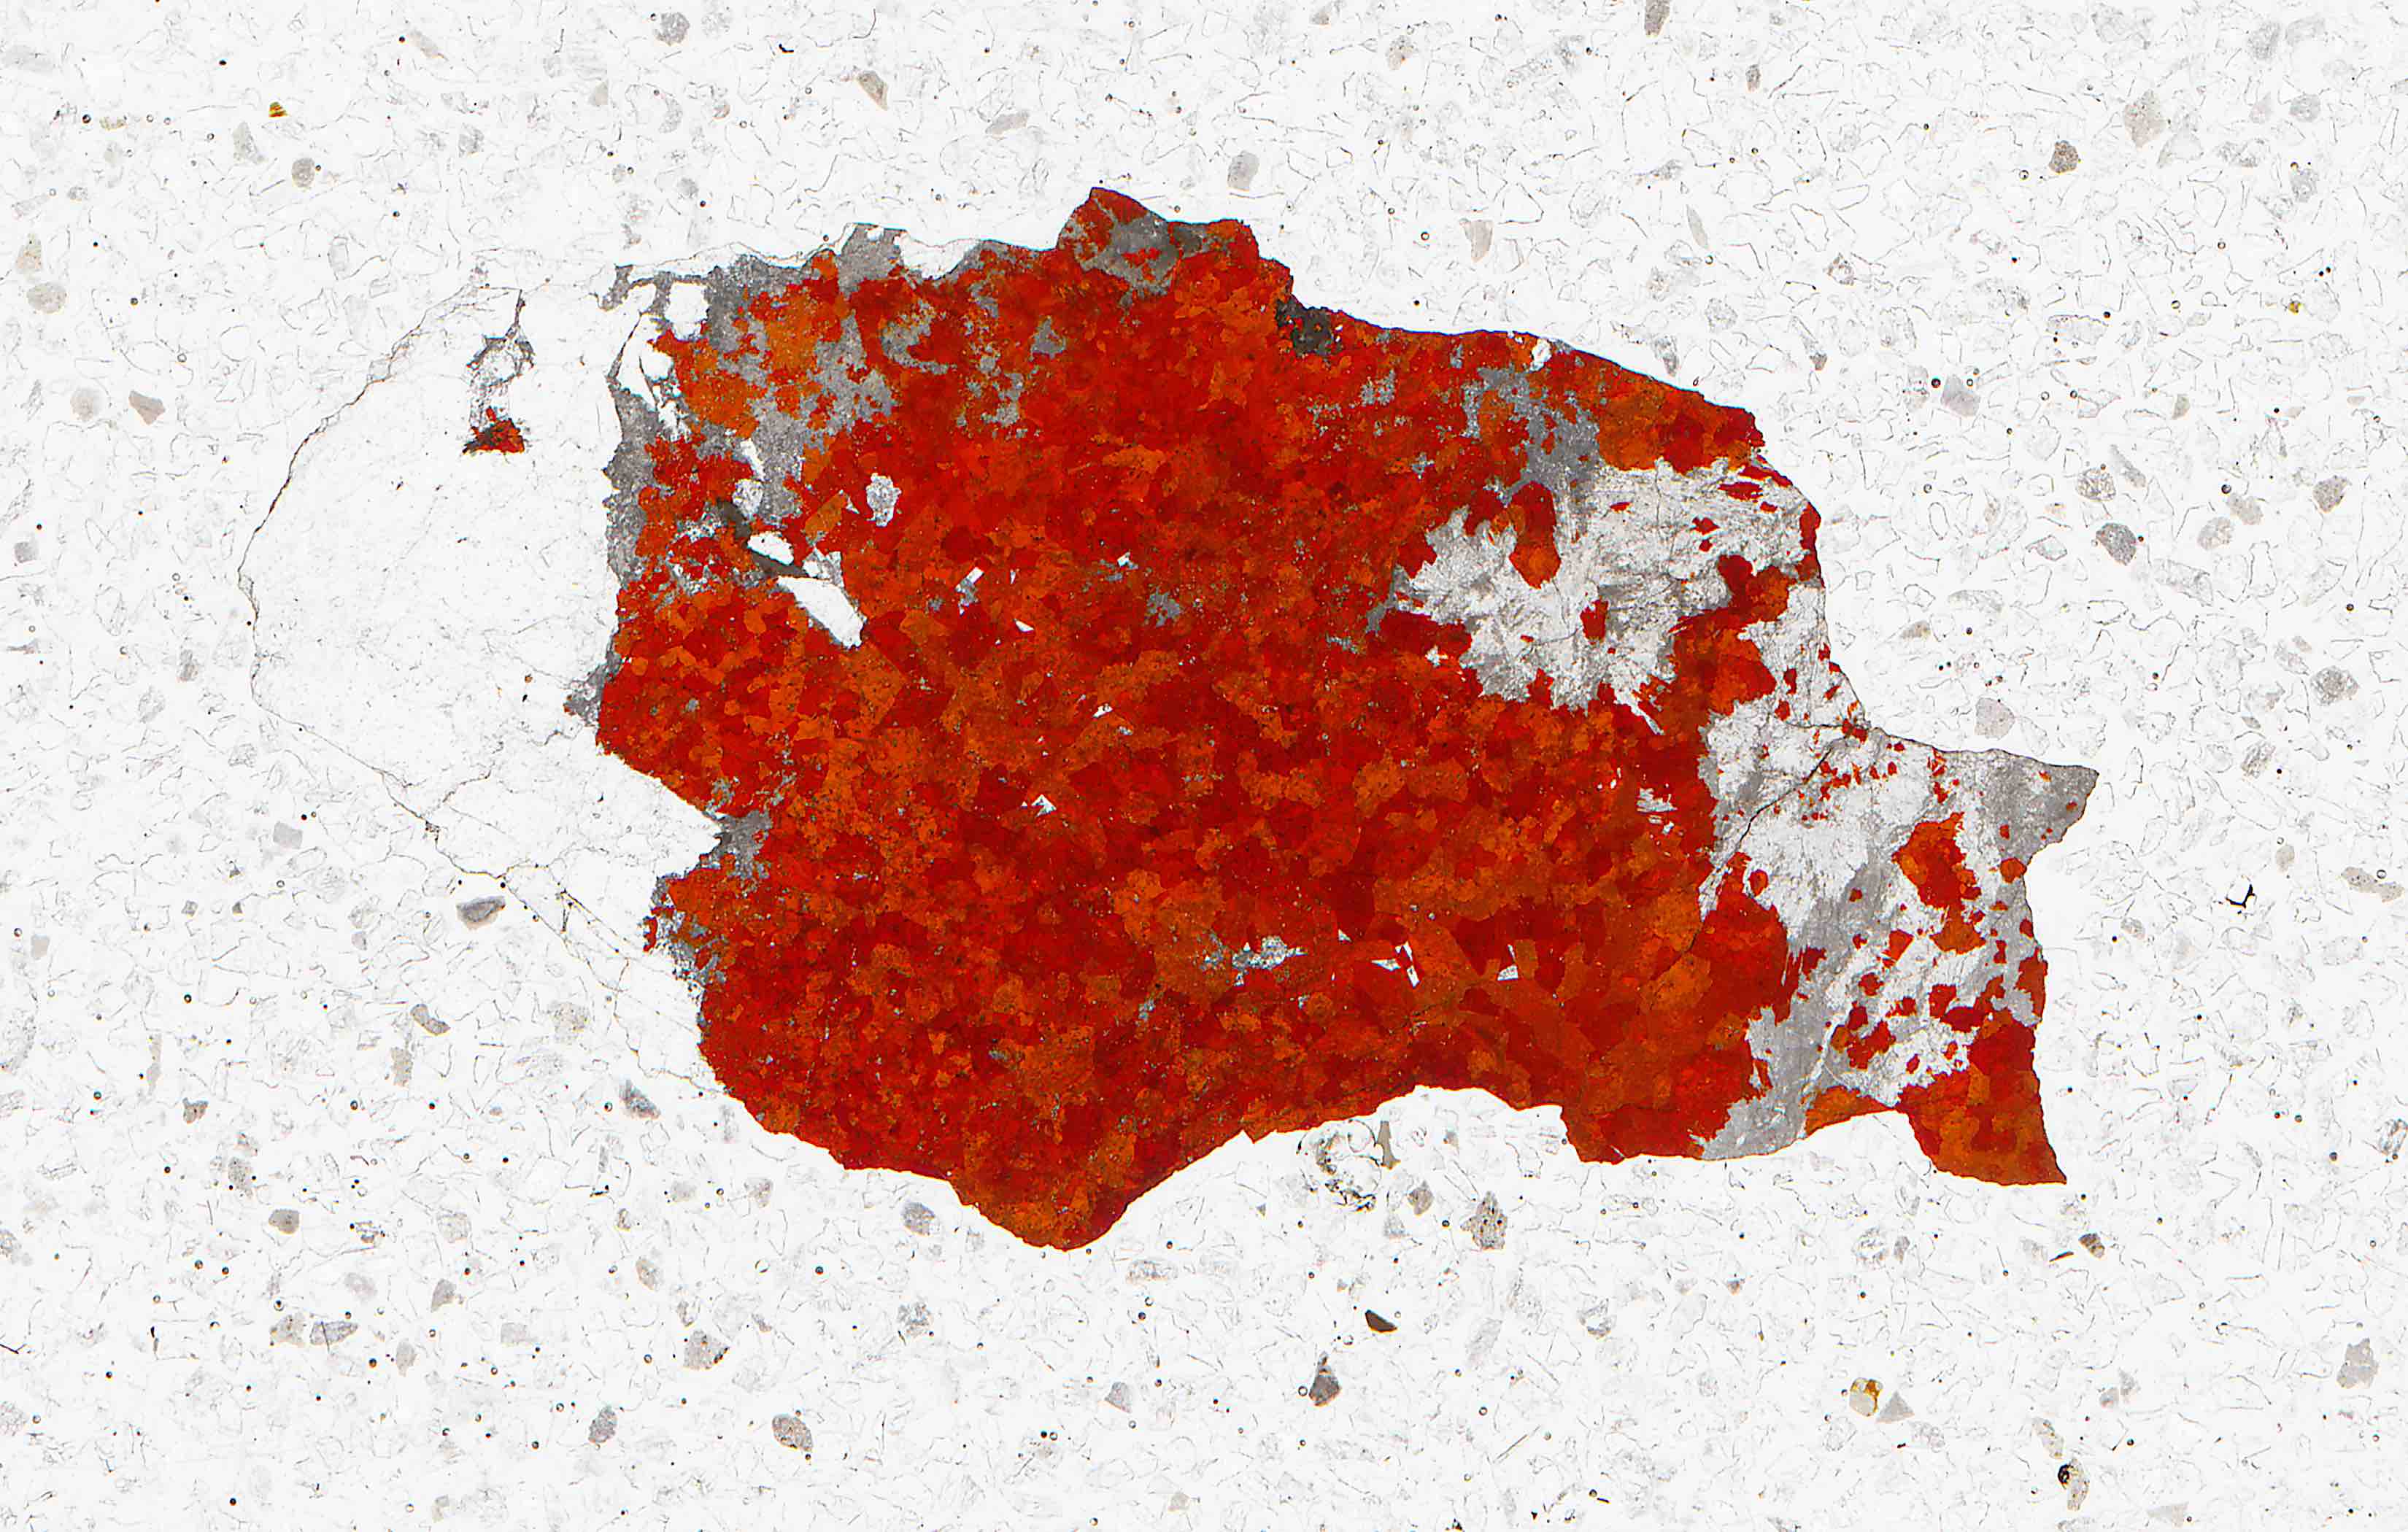 neptunite in syenite in thin section from Ilímaussaq Greenland